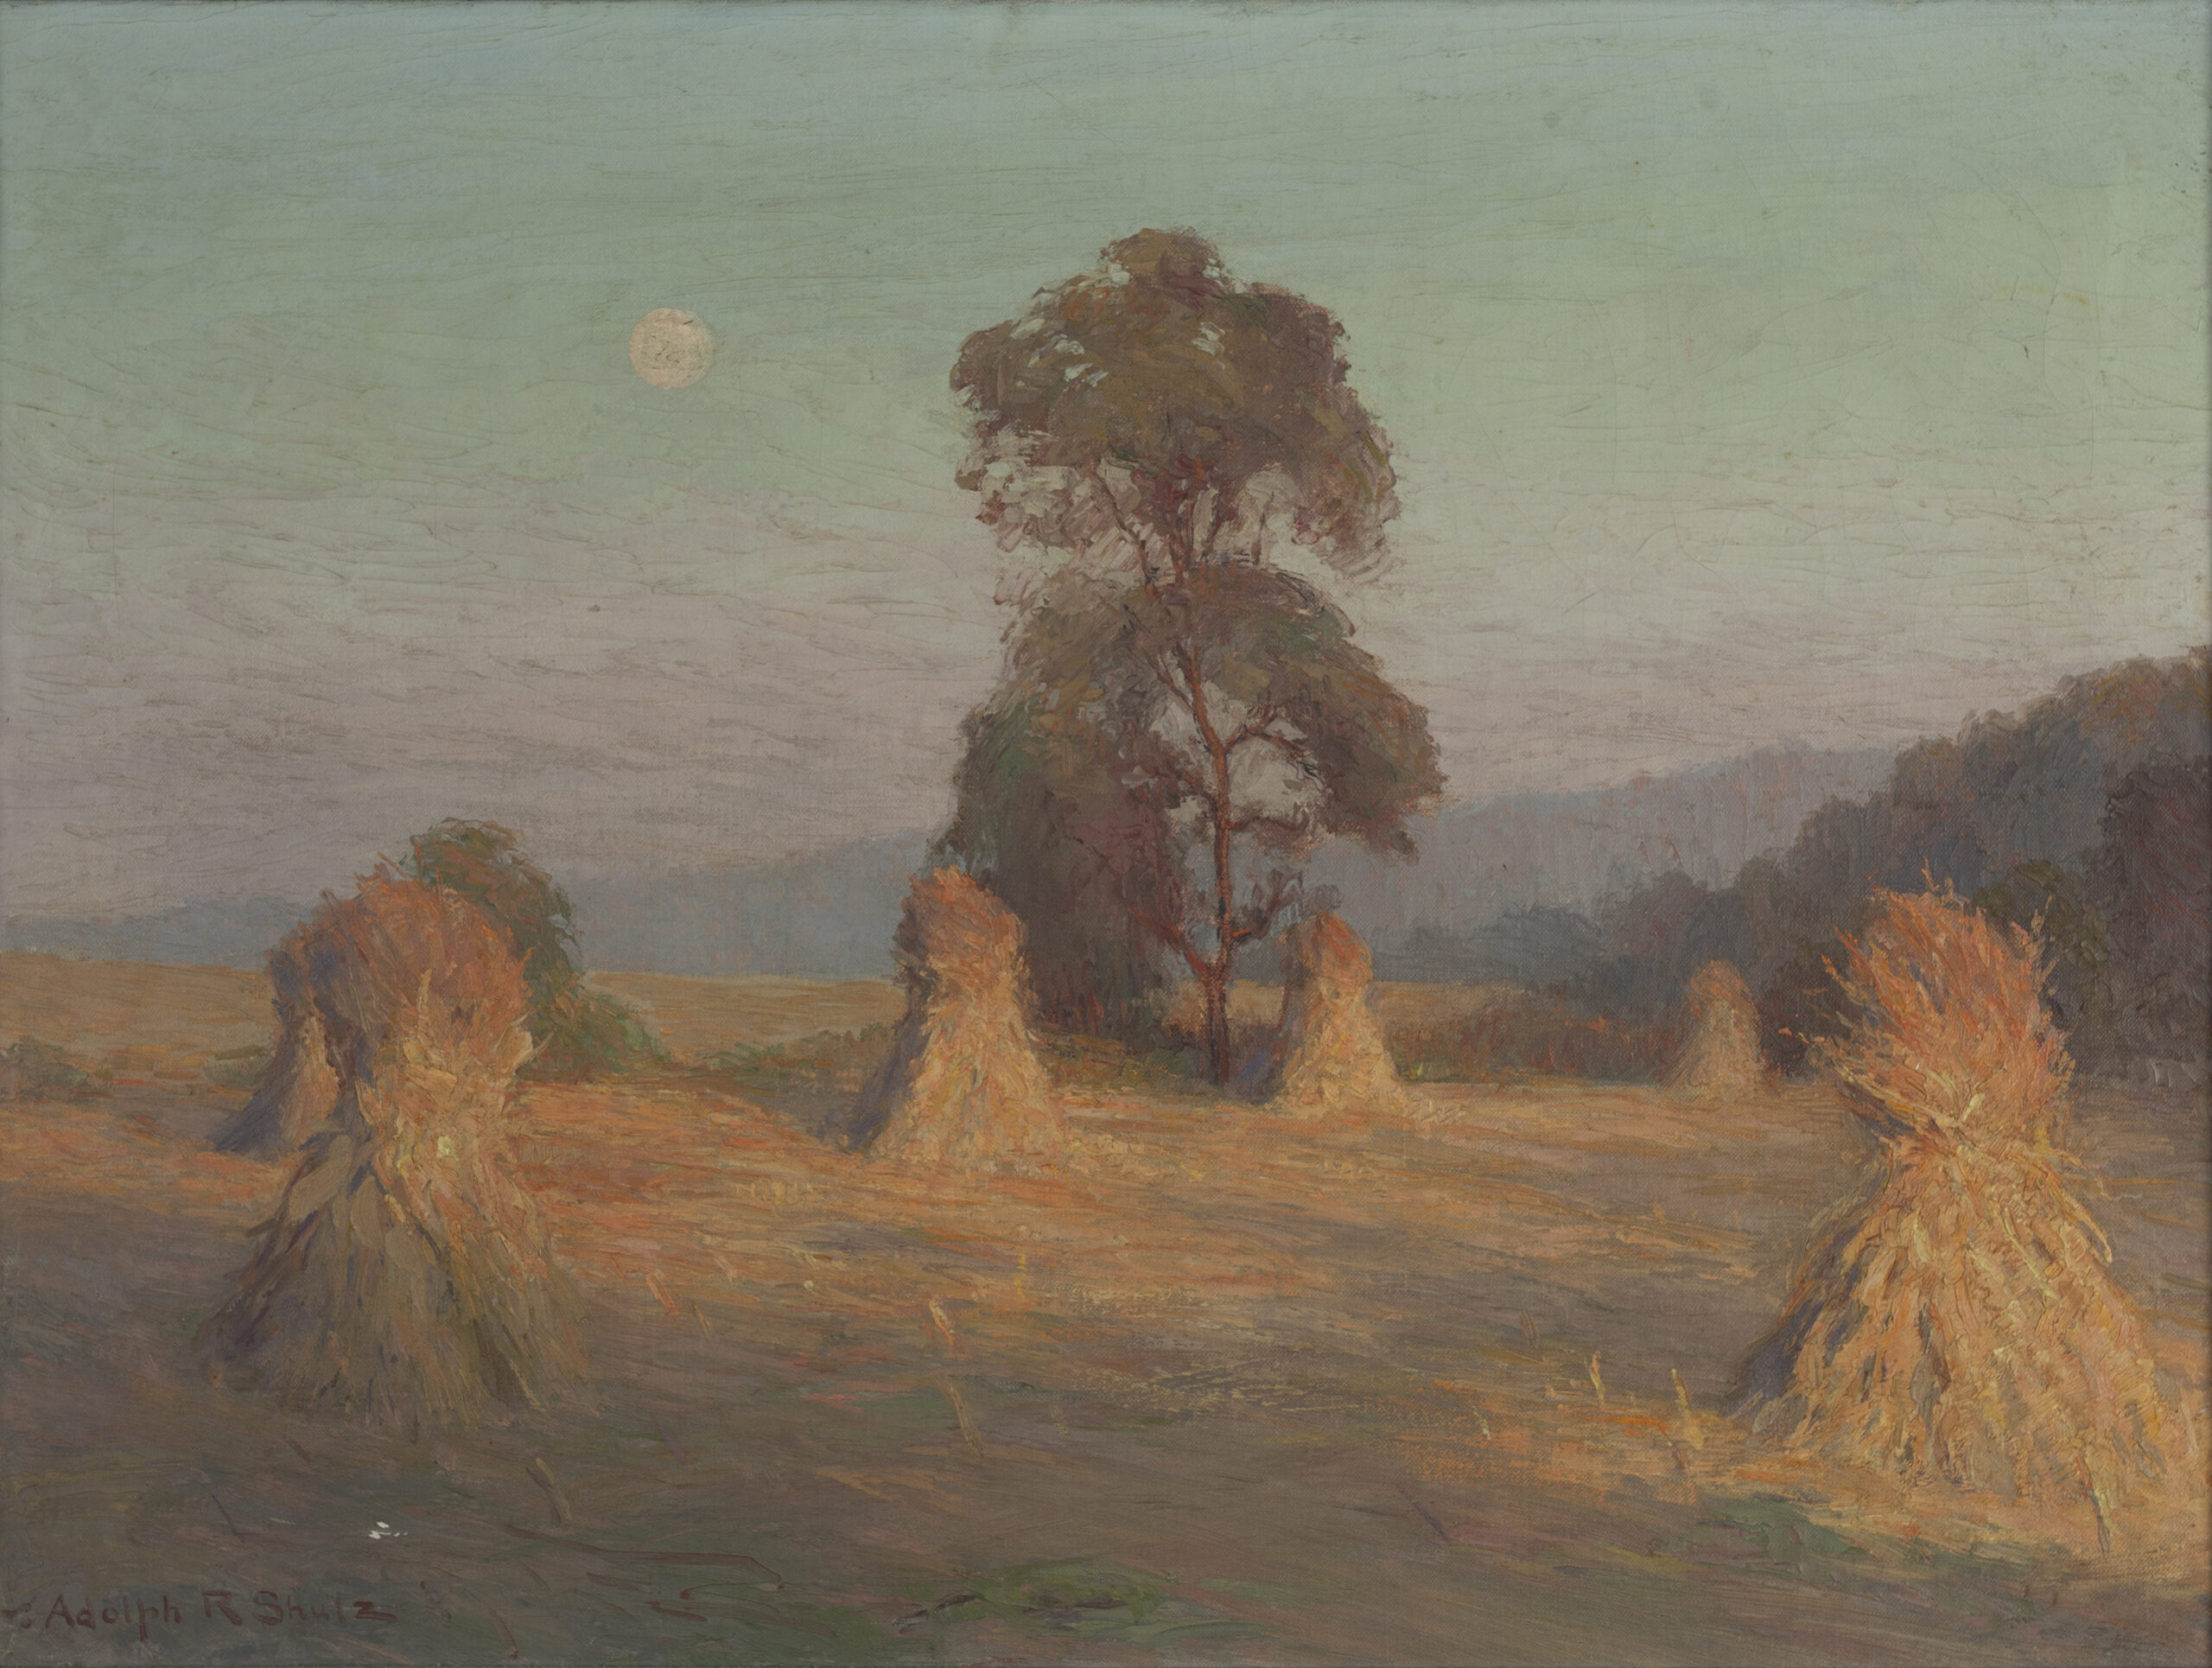 Impressionist style painting. The golden glow of sunset illuminates a fall field. Golden corn stalks are gathered in vertical clumps. The moon is seen in the sky. Green trees are seen on the horizon.